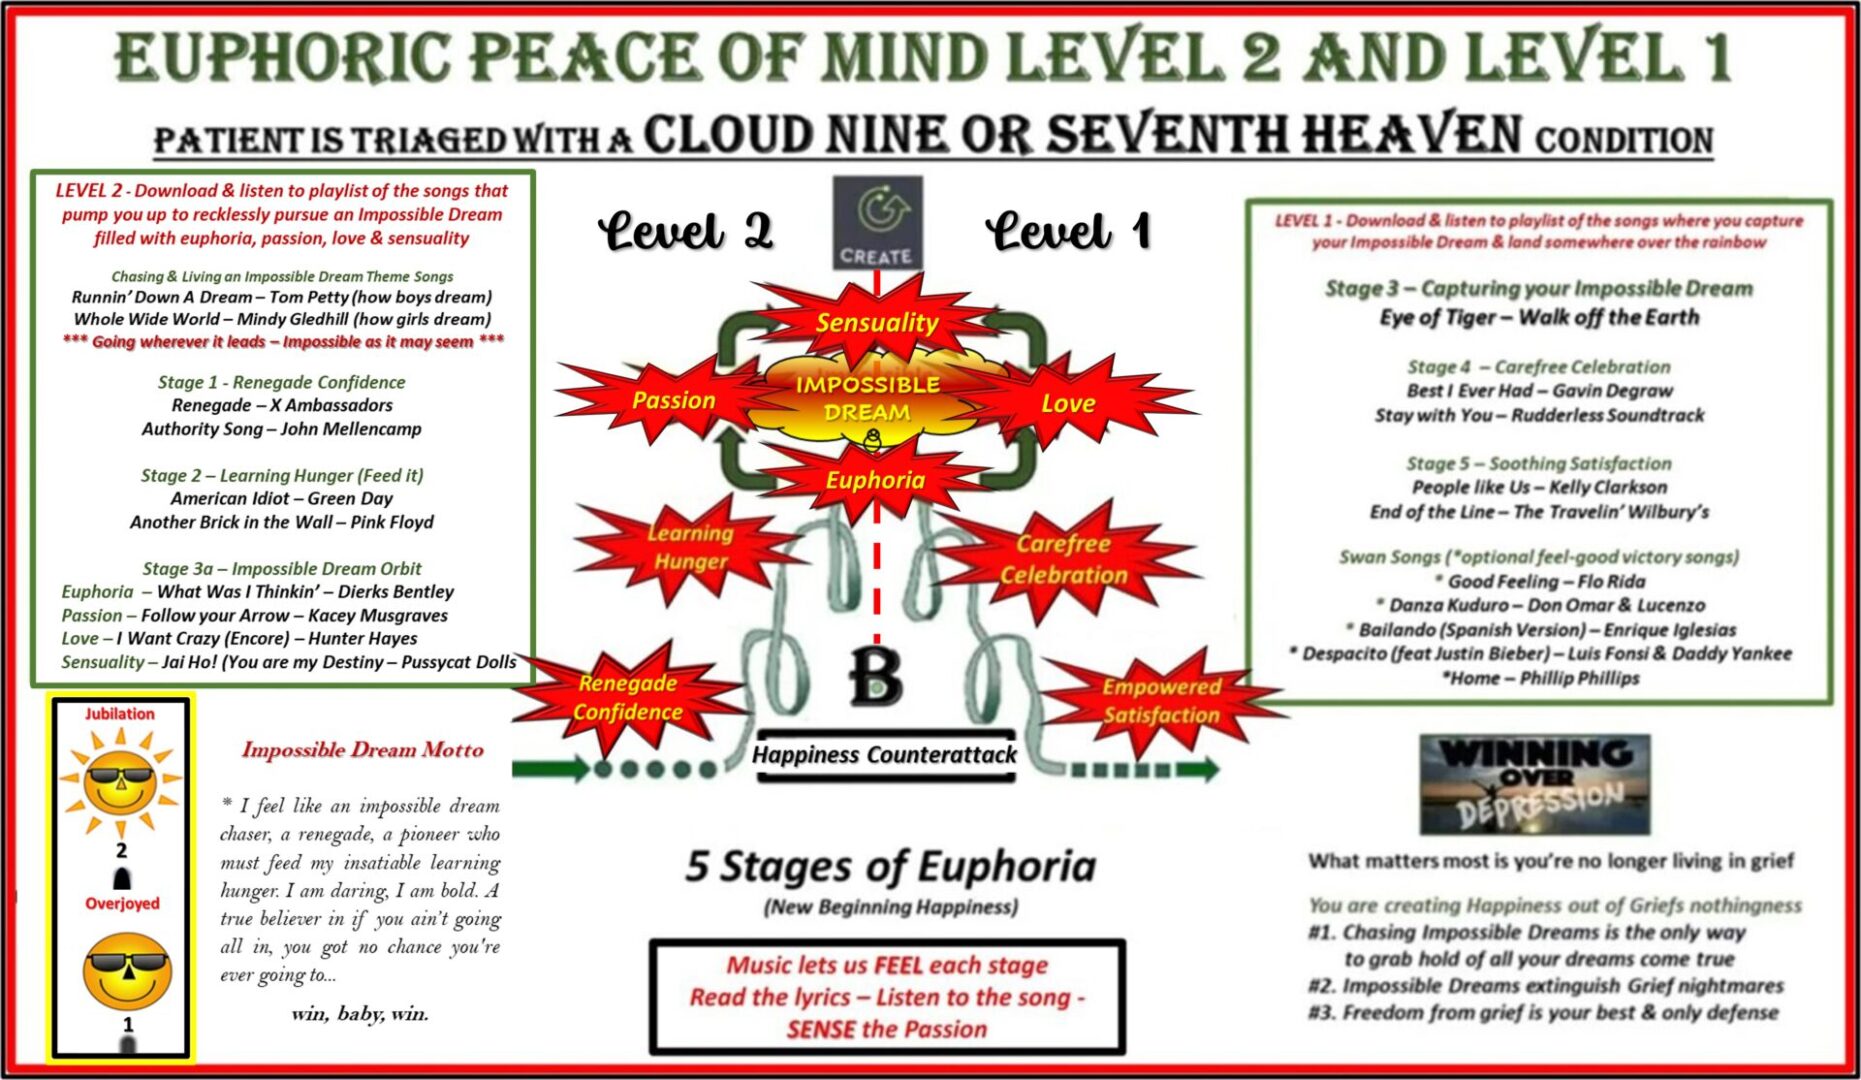 Level 2 & 1 - The 5 Stages of Euphoria